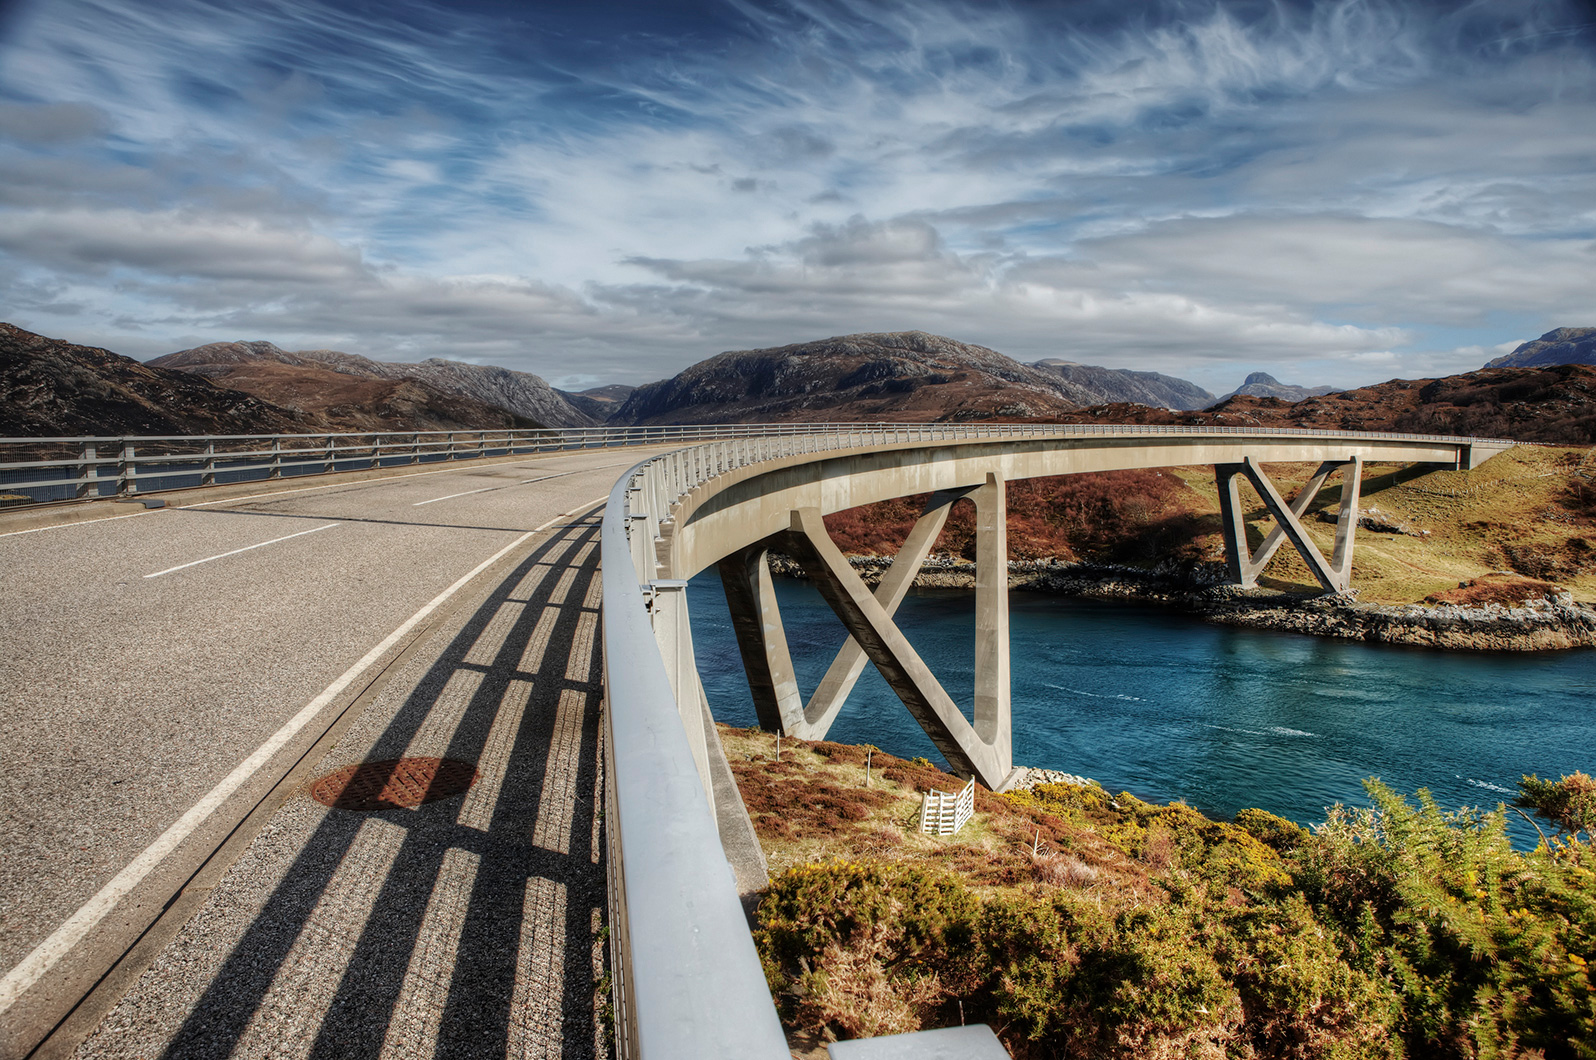 Bridge in the Scottish Highlands. Series of background images shot for Castrol gear box oil promotion.